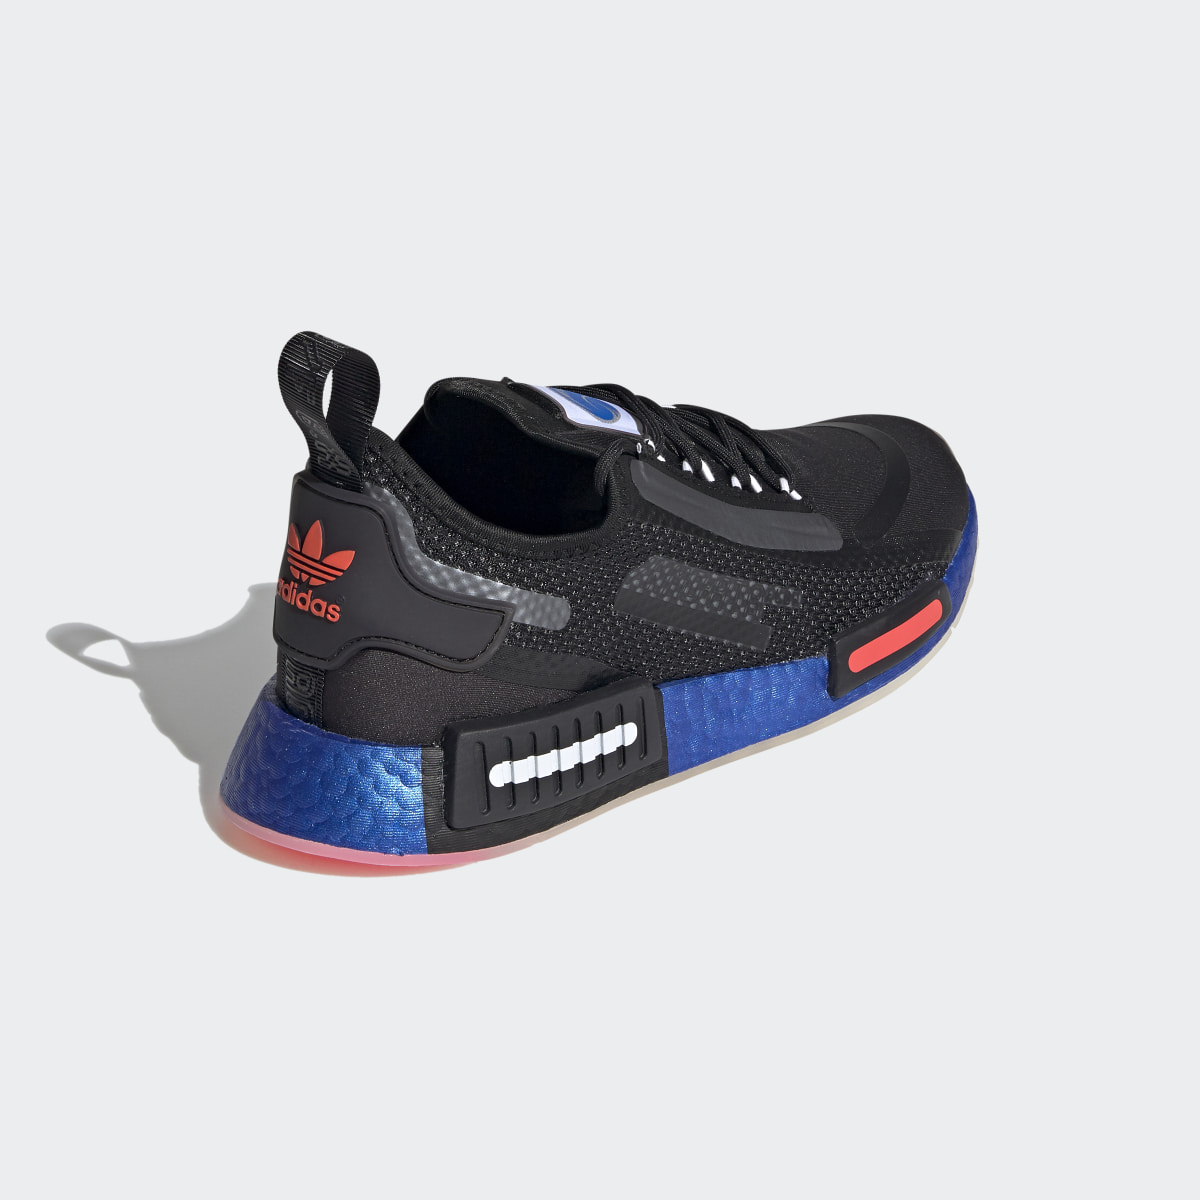 Adidas NMD_R1 SPECTOO SHOES. 6